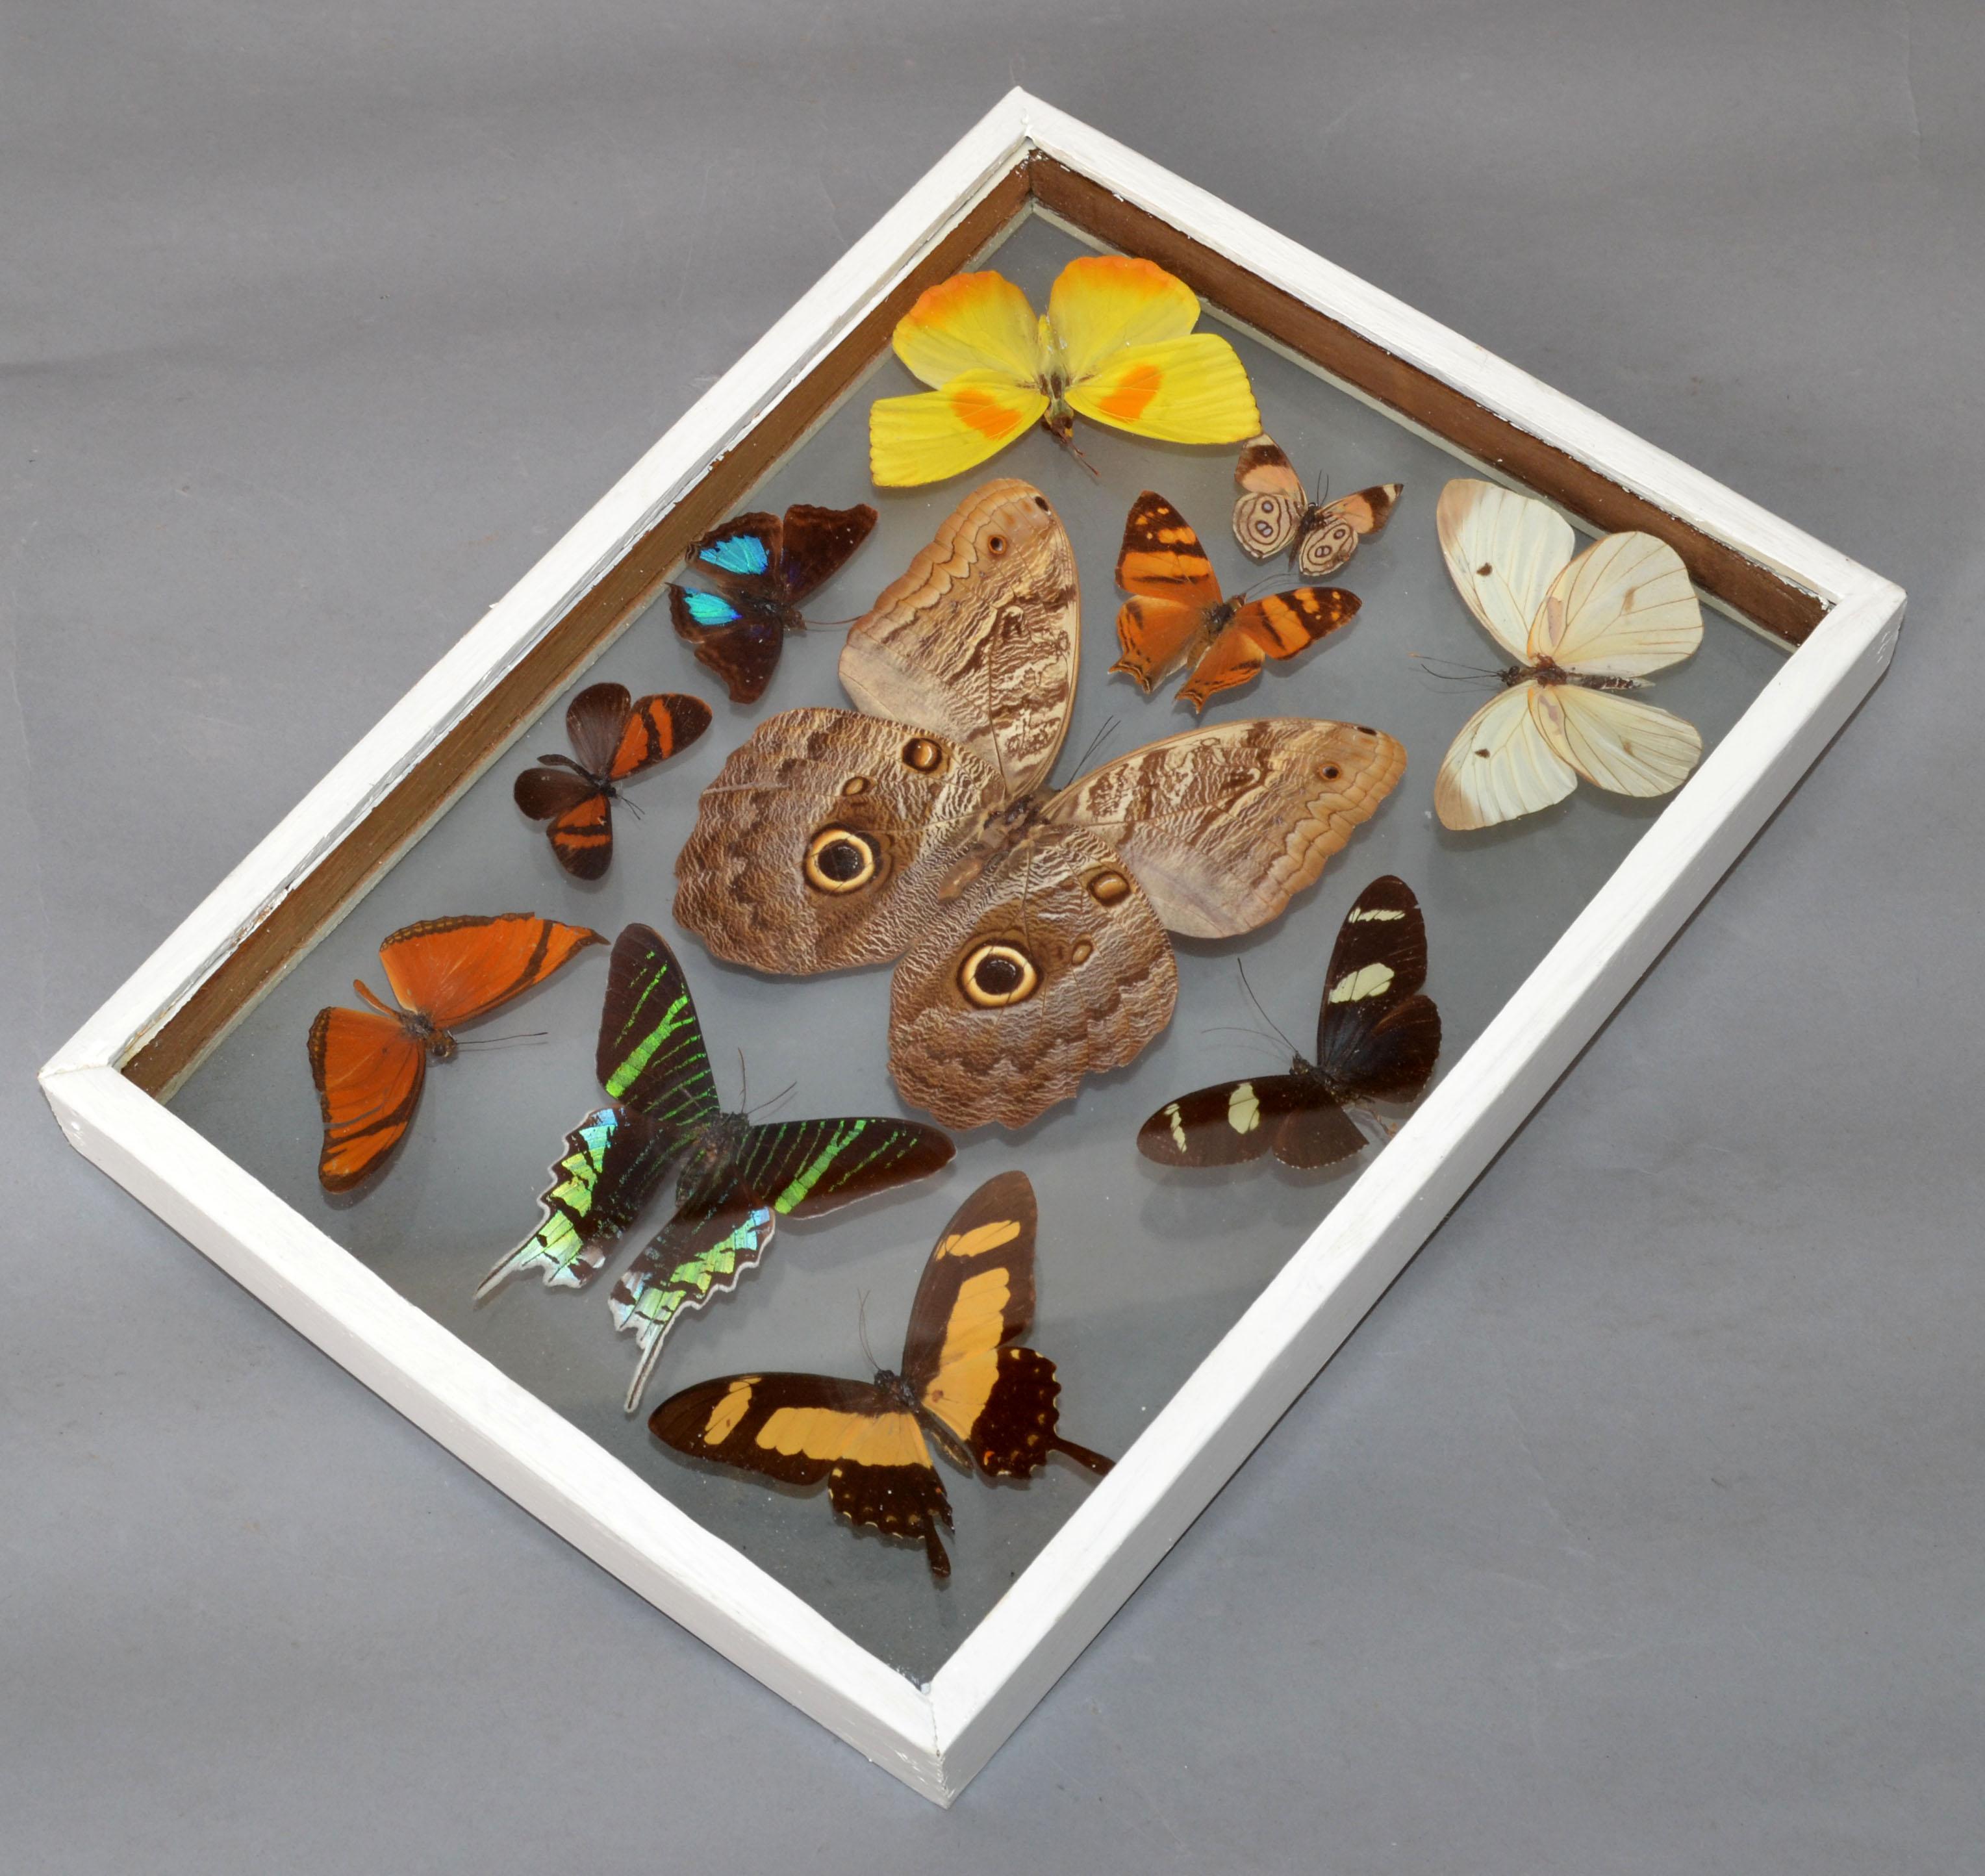 Mid-20th Century Vintage Glass Box Frame with Butterflies